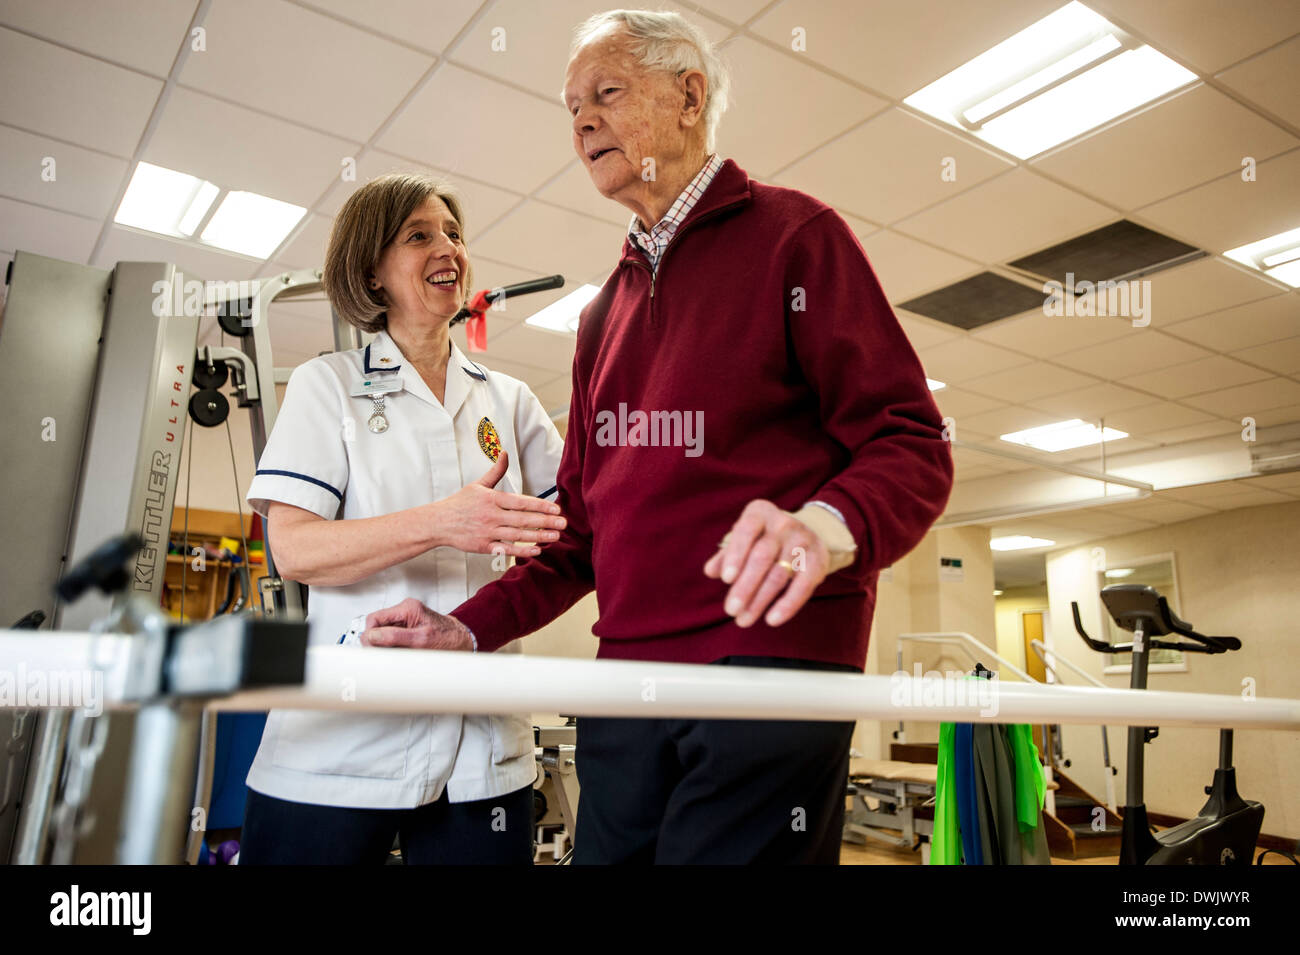 Royal Naval Reservist Stephanie Shinner Cdr RD RNR CO HMS WILDFIRE currently the only female commanding officer in The Royal Naval Reserves. Pictured at The Chiltern Hospital Bucks / BMI Healthcare where she is a consultant physiotherapist . She is pictured in consultation with 93 year old John Mason 93 who she has been seeing for over three years. Stock Photo